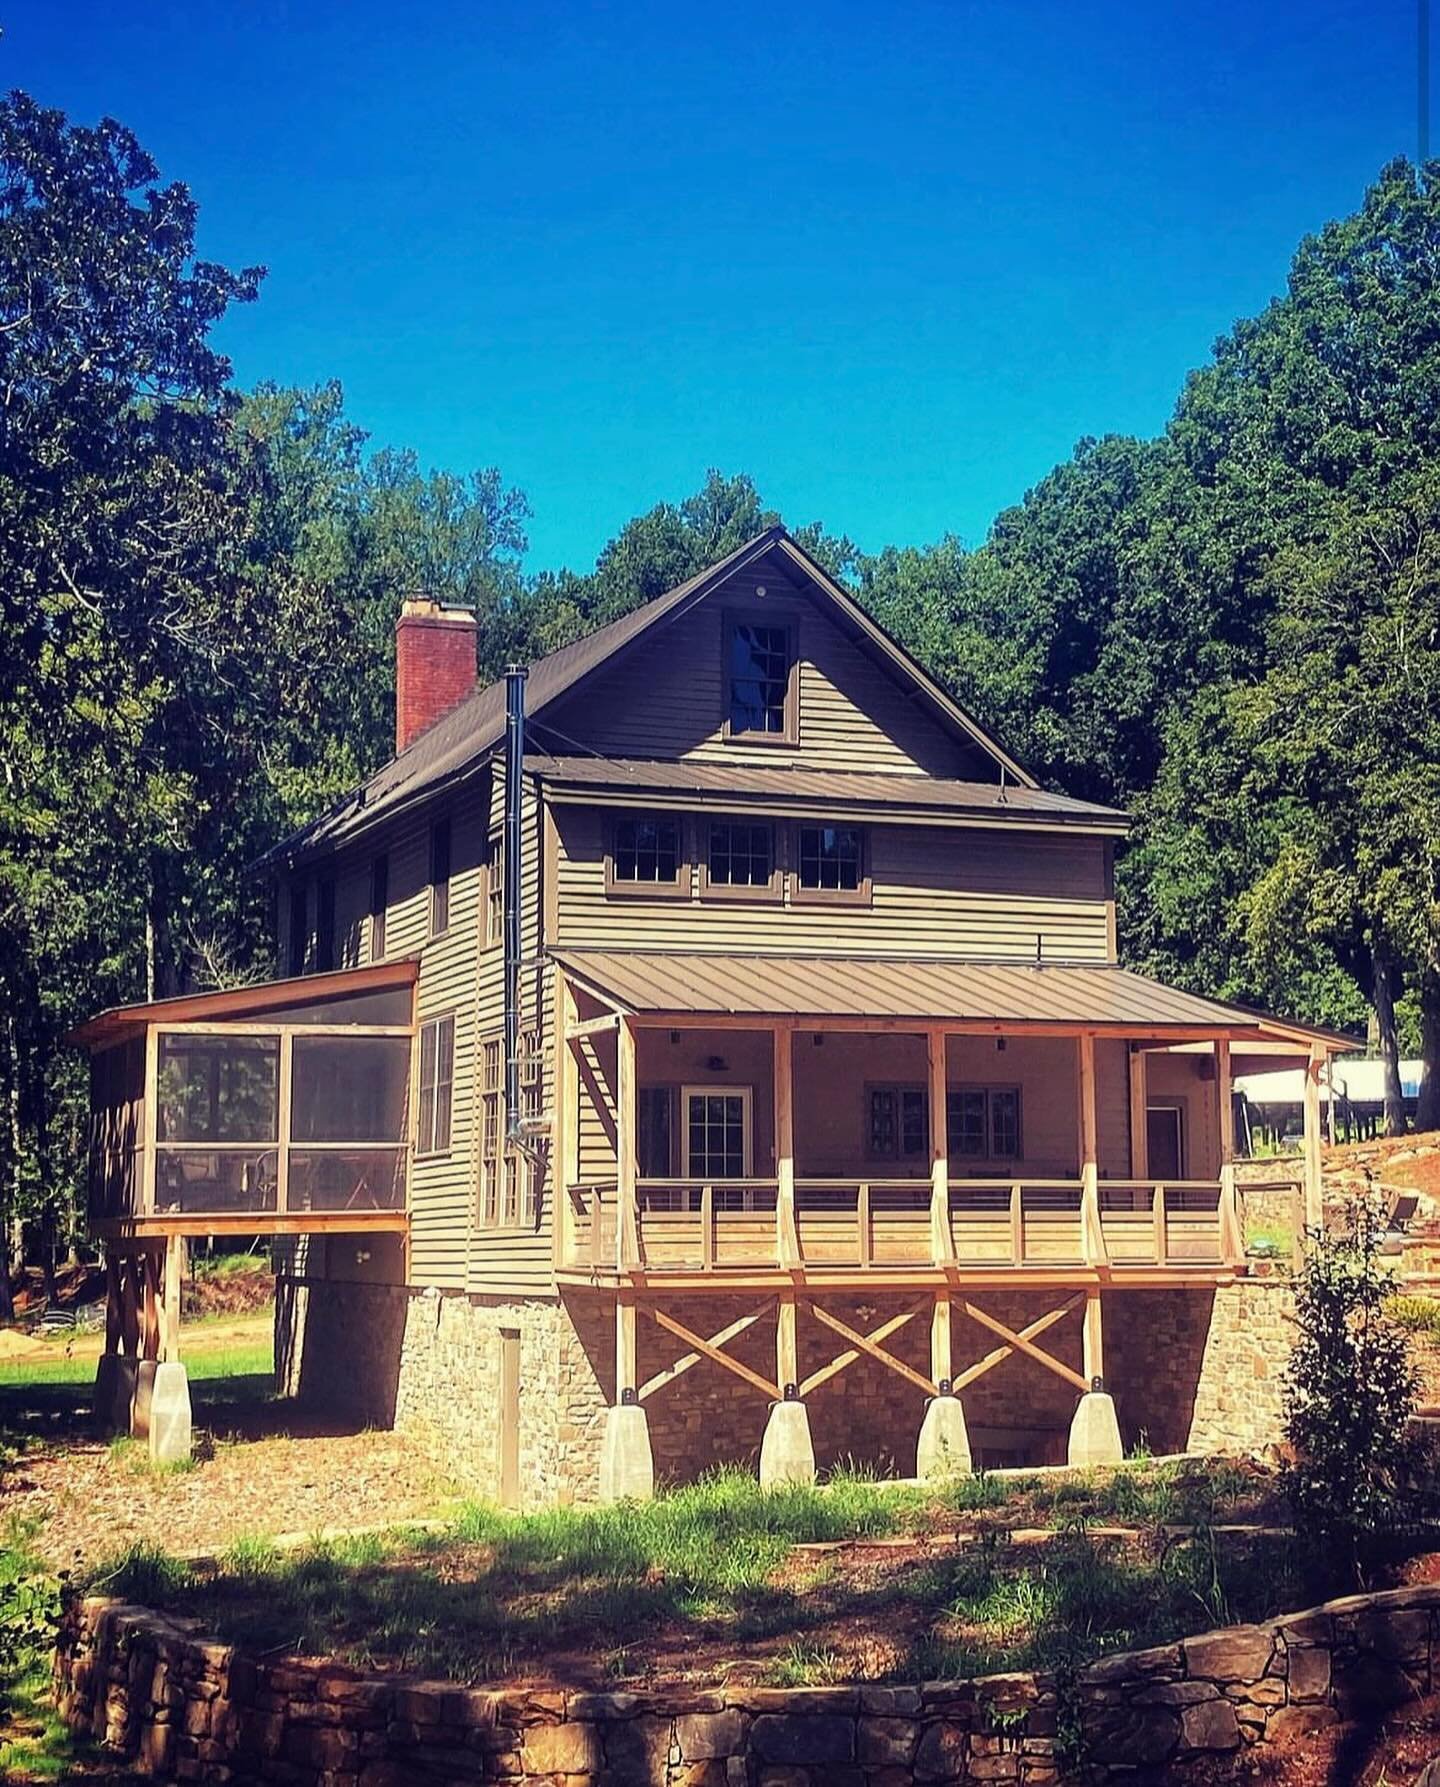 Can you use lumber derived from your own land to renovate your home? You betcha. 

This beautiful historic home, which was the old Morrow Mill, needed 12x12 beams to be elevated and historically restored. We milled the lumber from big pines on the pr